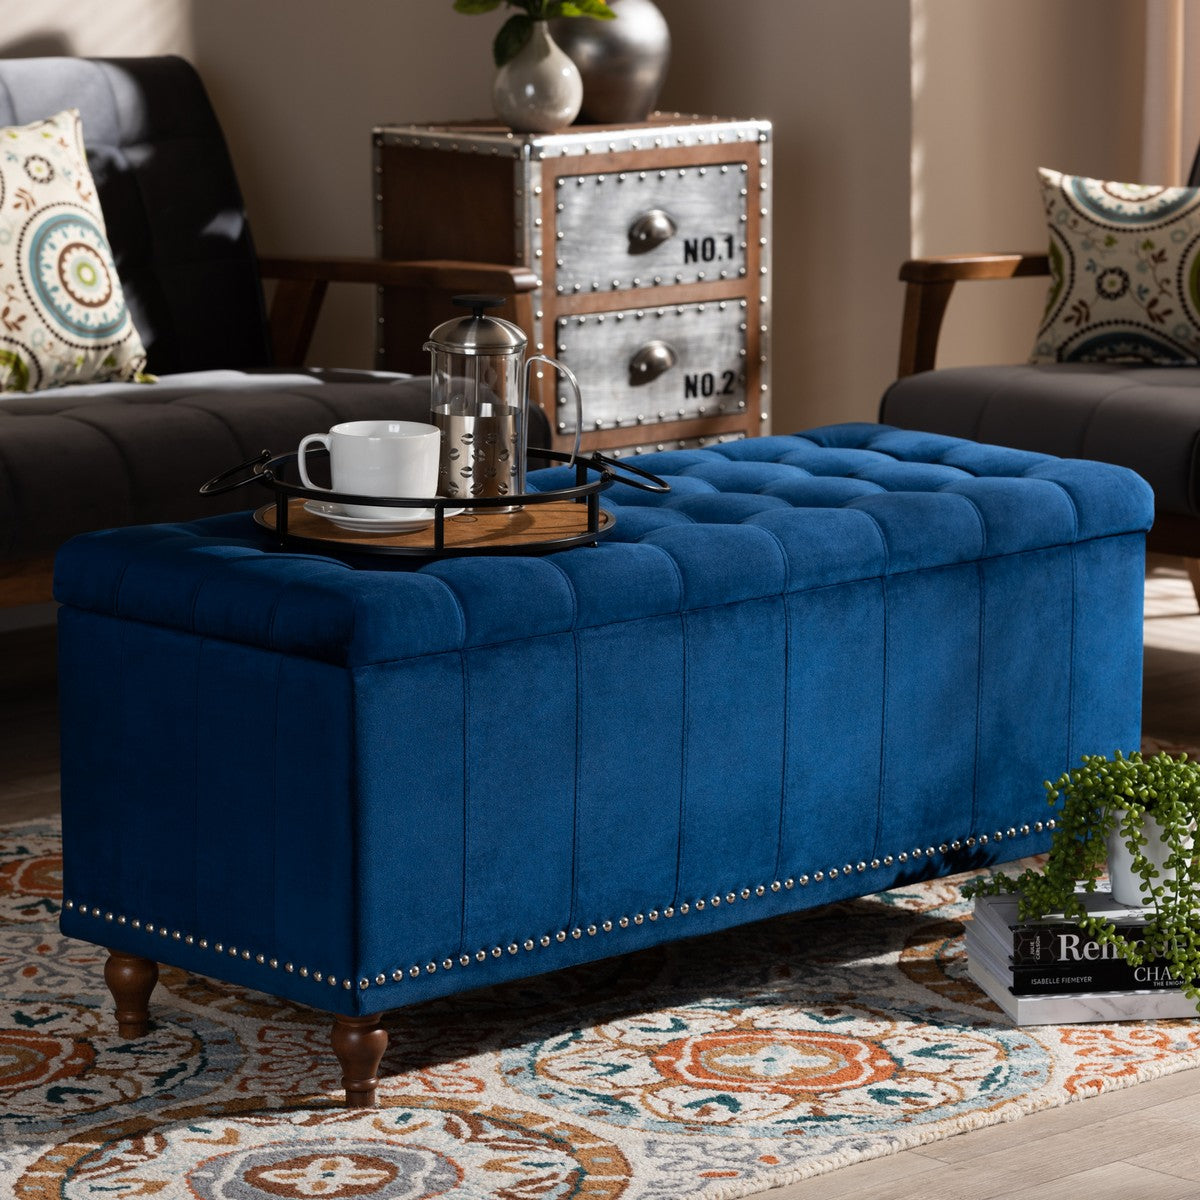 Baxton Studio Kaylee Modern and Contemporary Navy Blue Velvet Fabric Upholstered Button-Tufted Storage Ottoman Bench